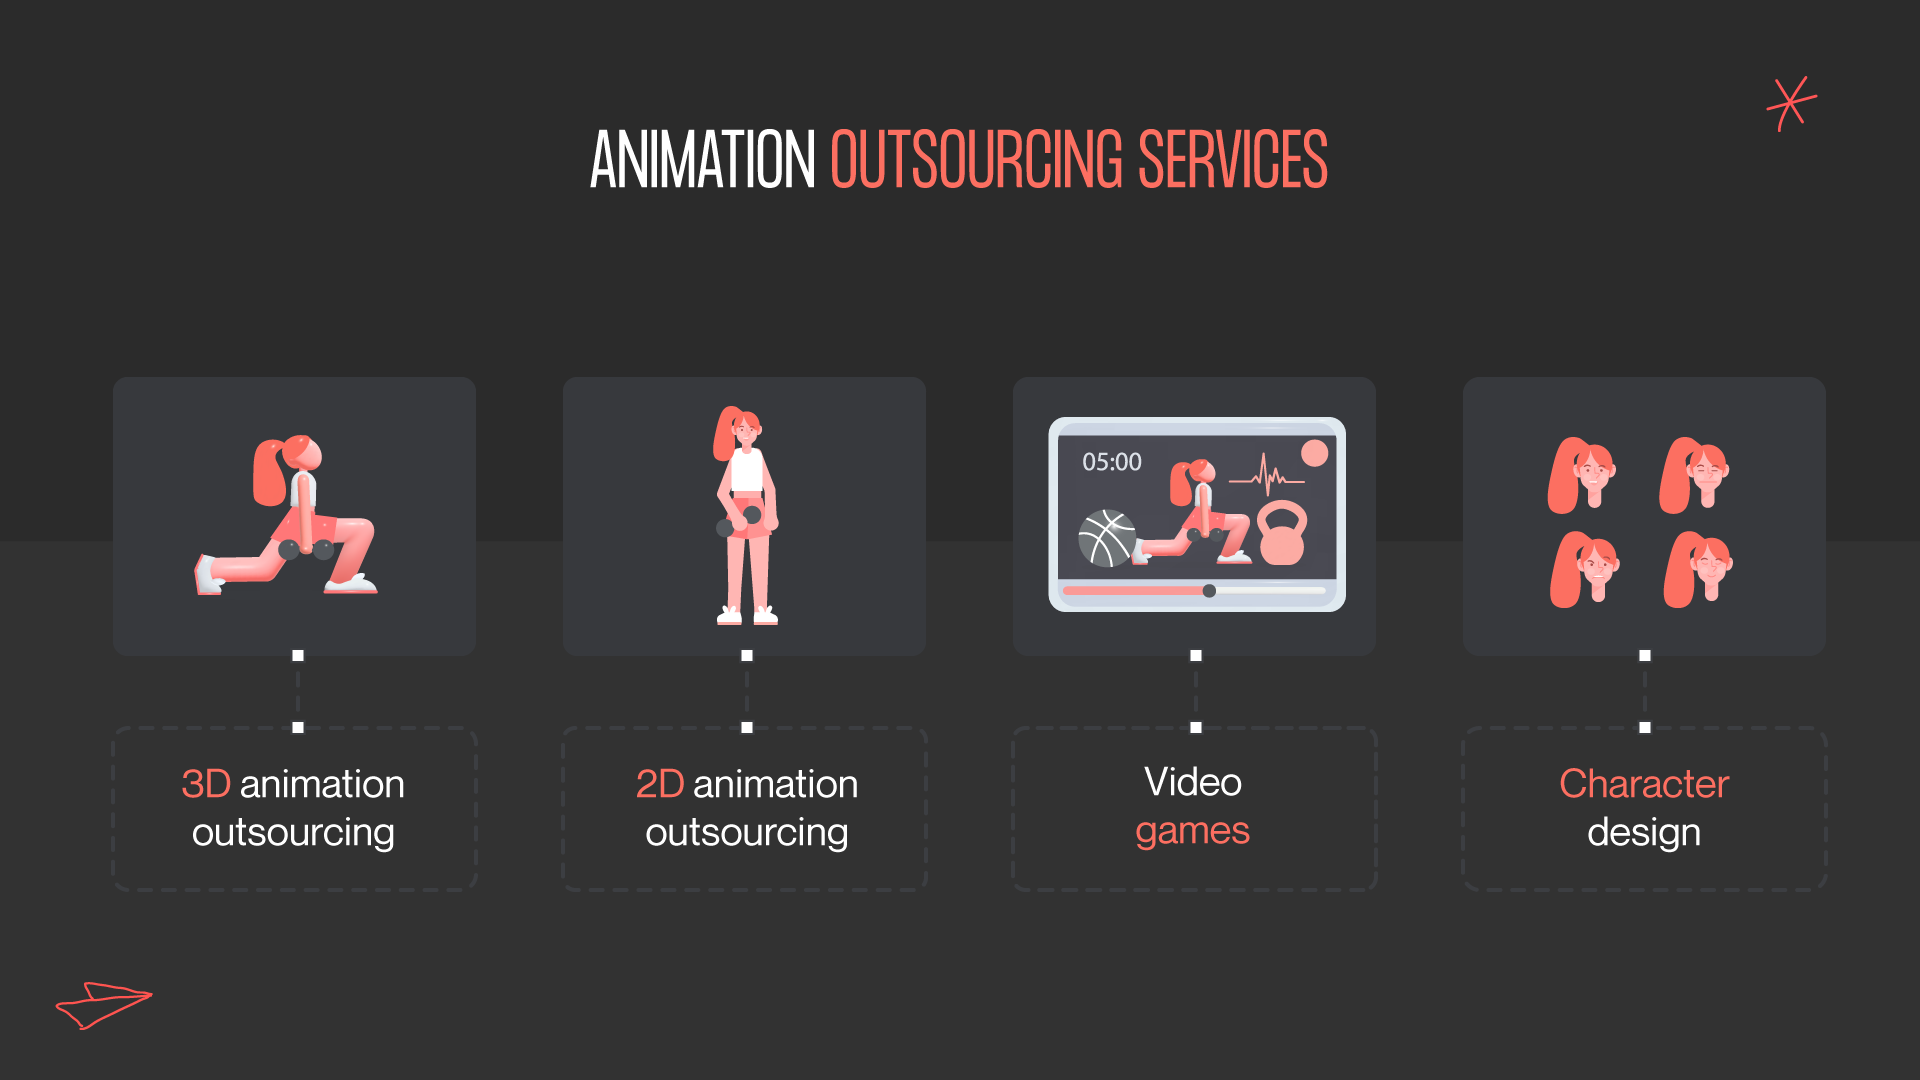 Our animation outsourcing services